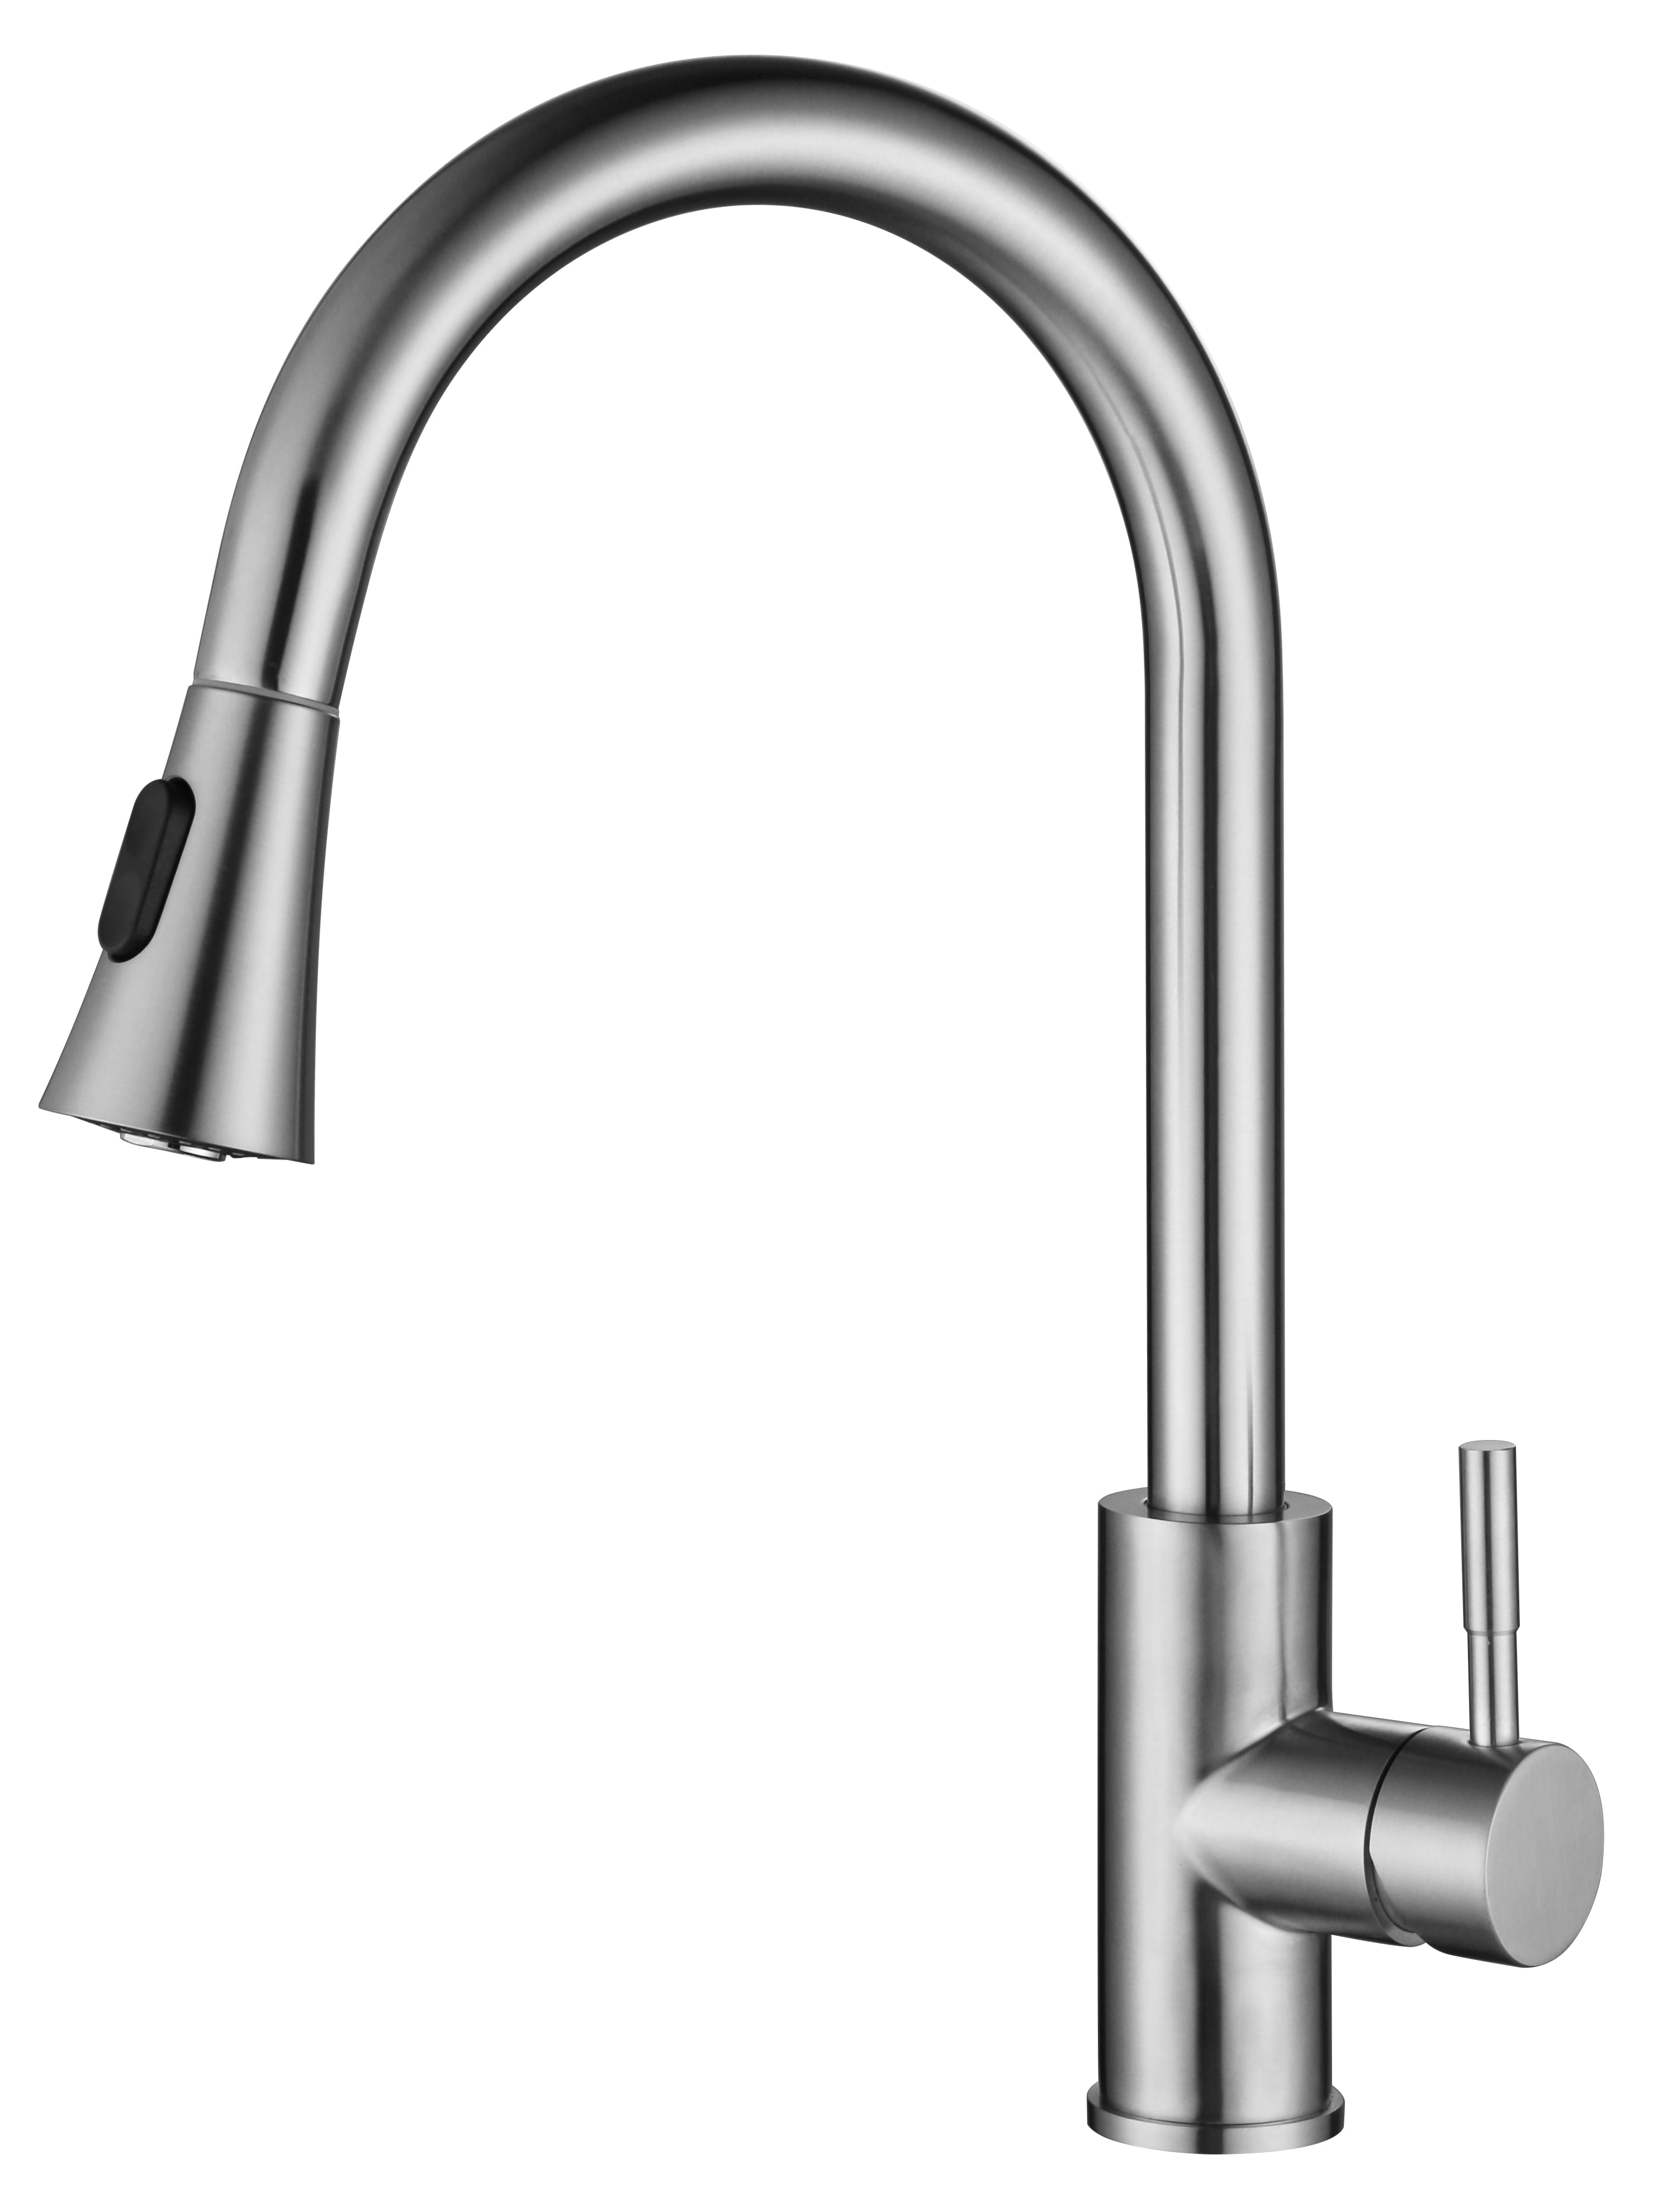 Duoupa Single Handle High Arc Brushed Nickel Pull Out Kitchen Faucet, Single Level Stainless Steel Kitchen Sink Faucets with Pull Down Sprayer